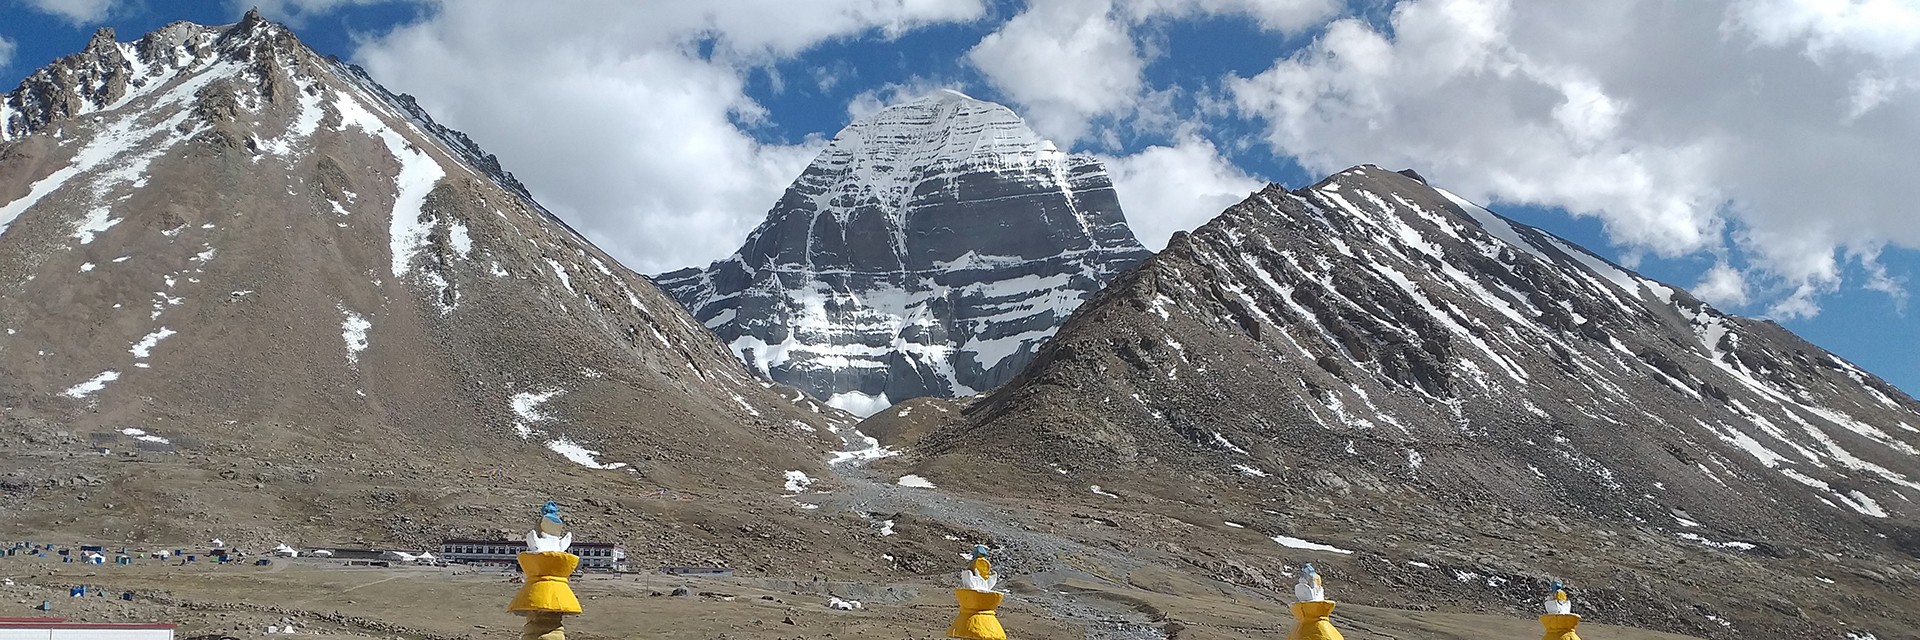 Kailash Tour by helicopter via Lucknow